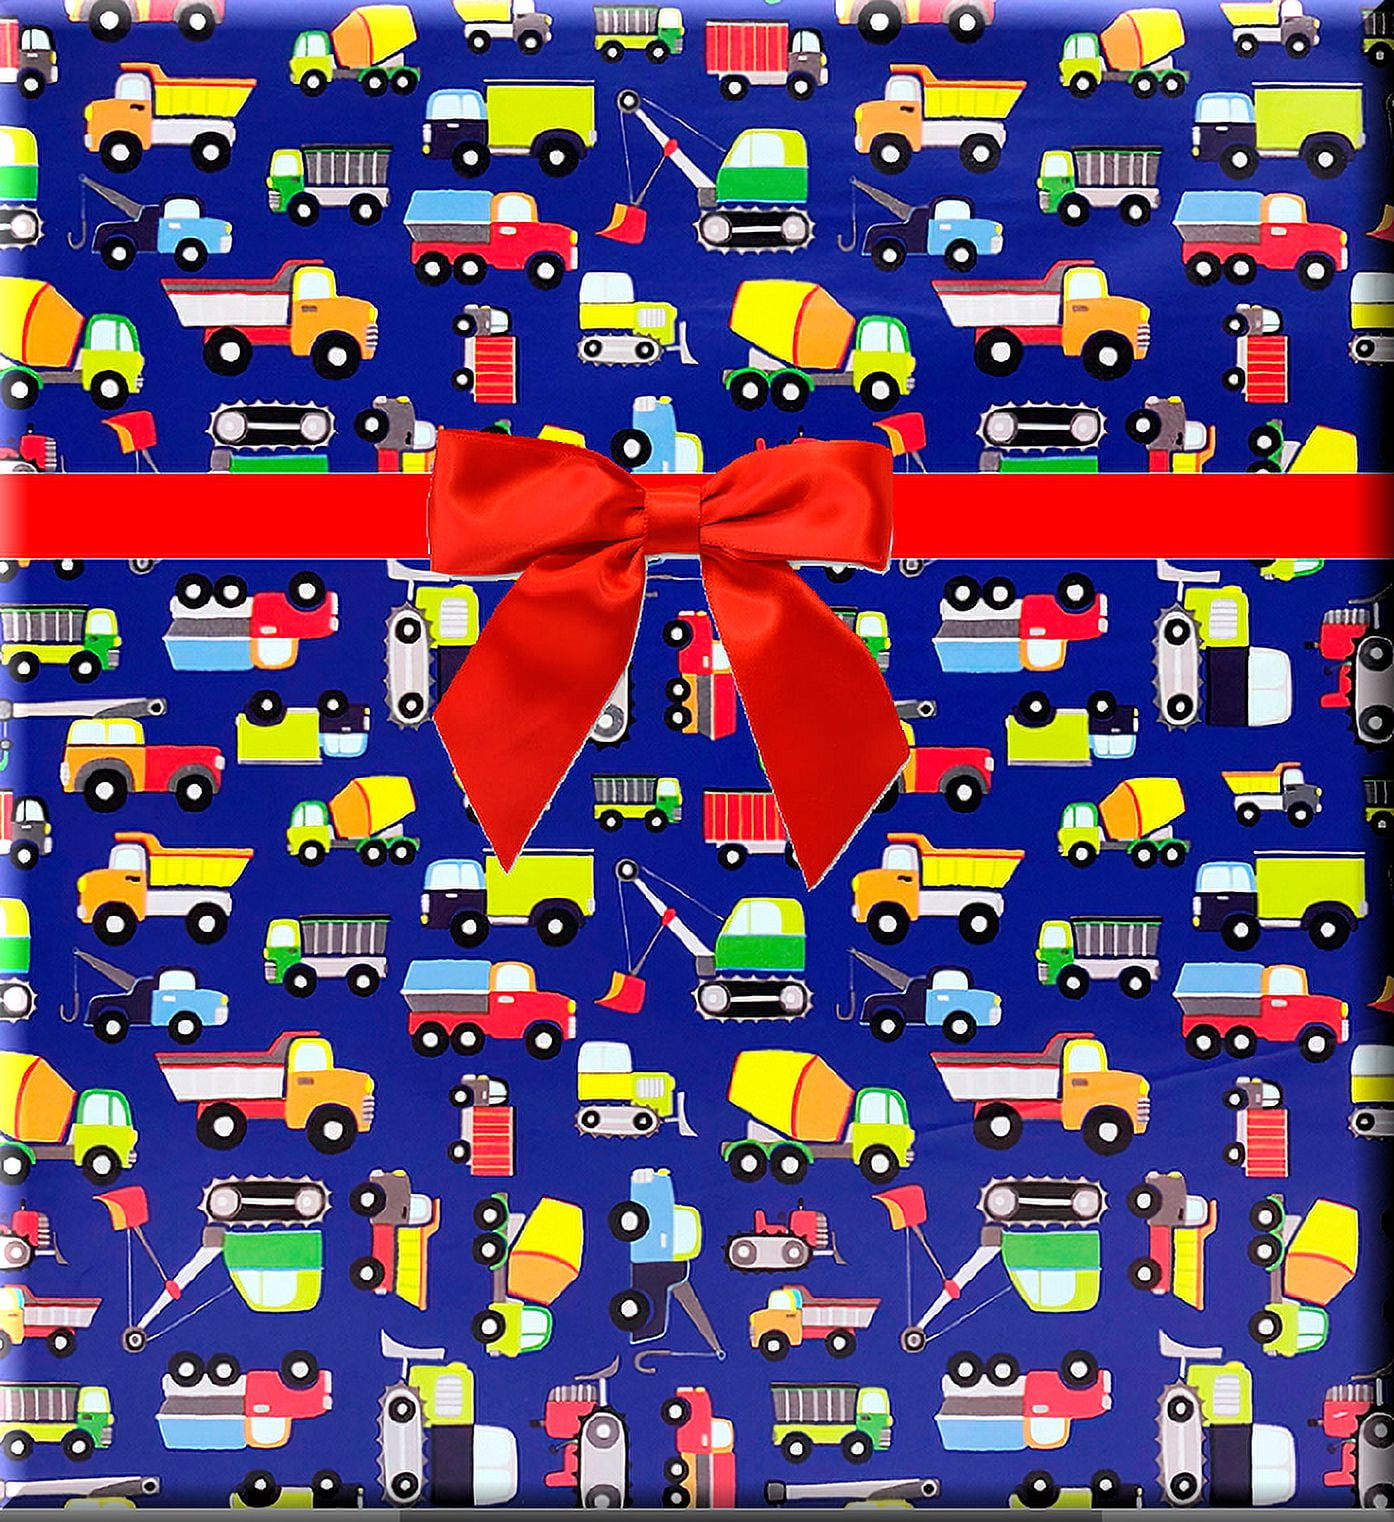 Construction Dump Truck and Vehicles Specialty Gift Wrapping Paper -15Foot  Roll with Gift Labels 